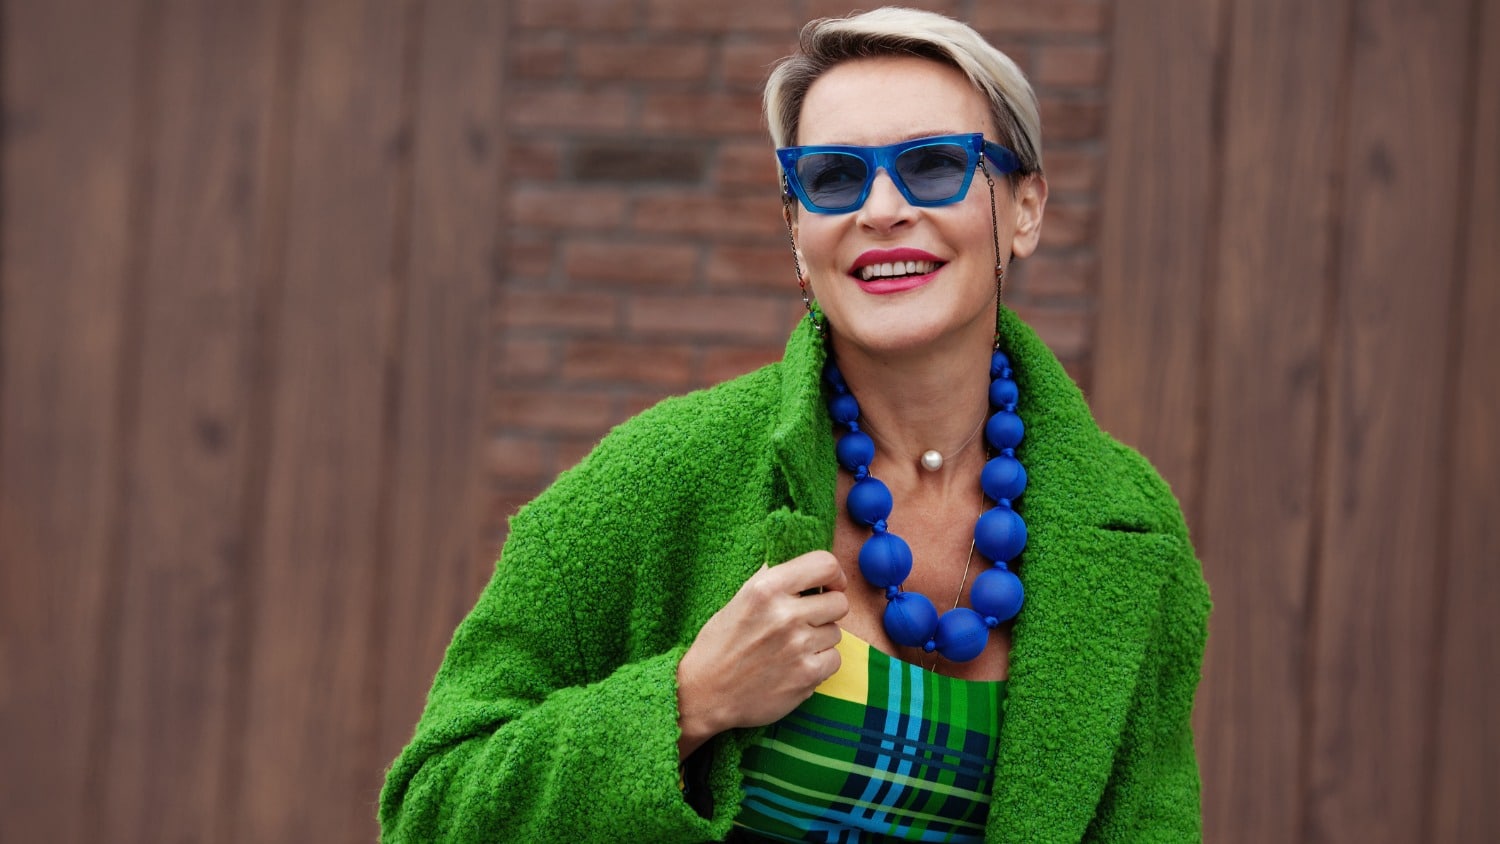 Fall/Winter 2022/23 Fashion Trends for Women Over 50 | Sixty and Me